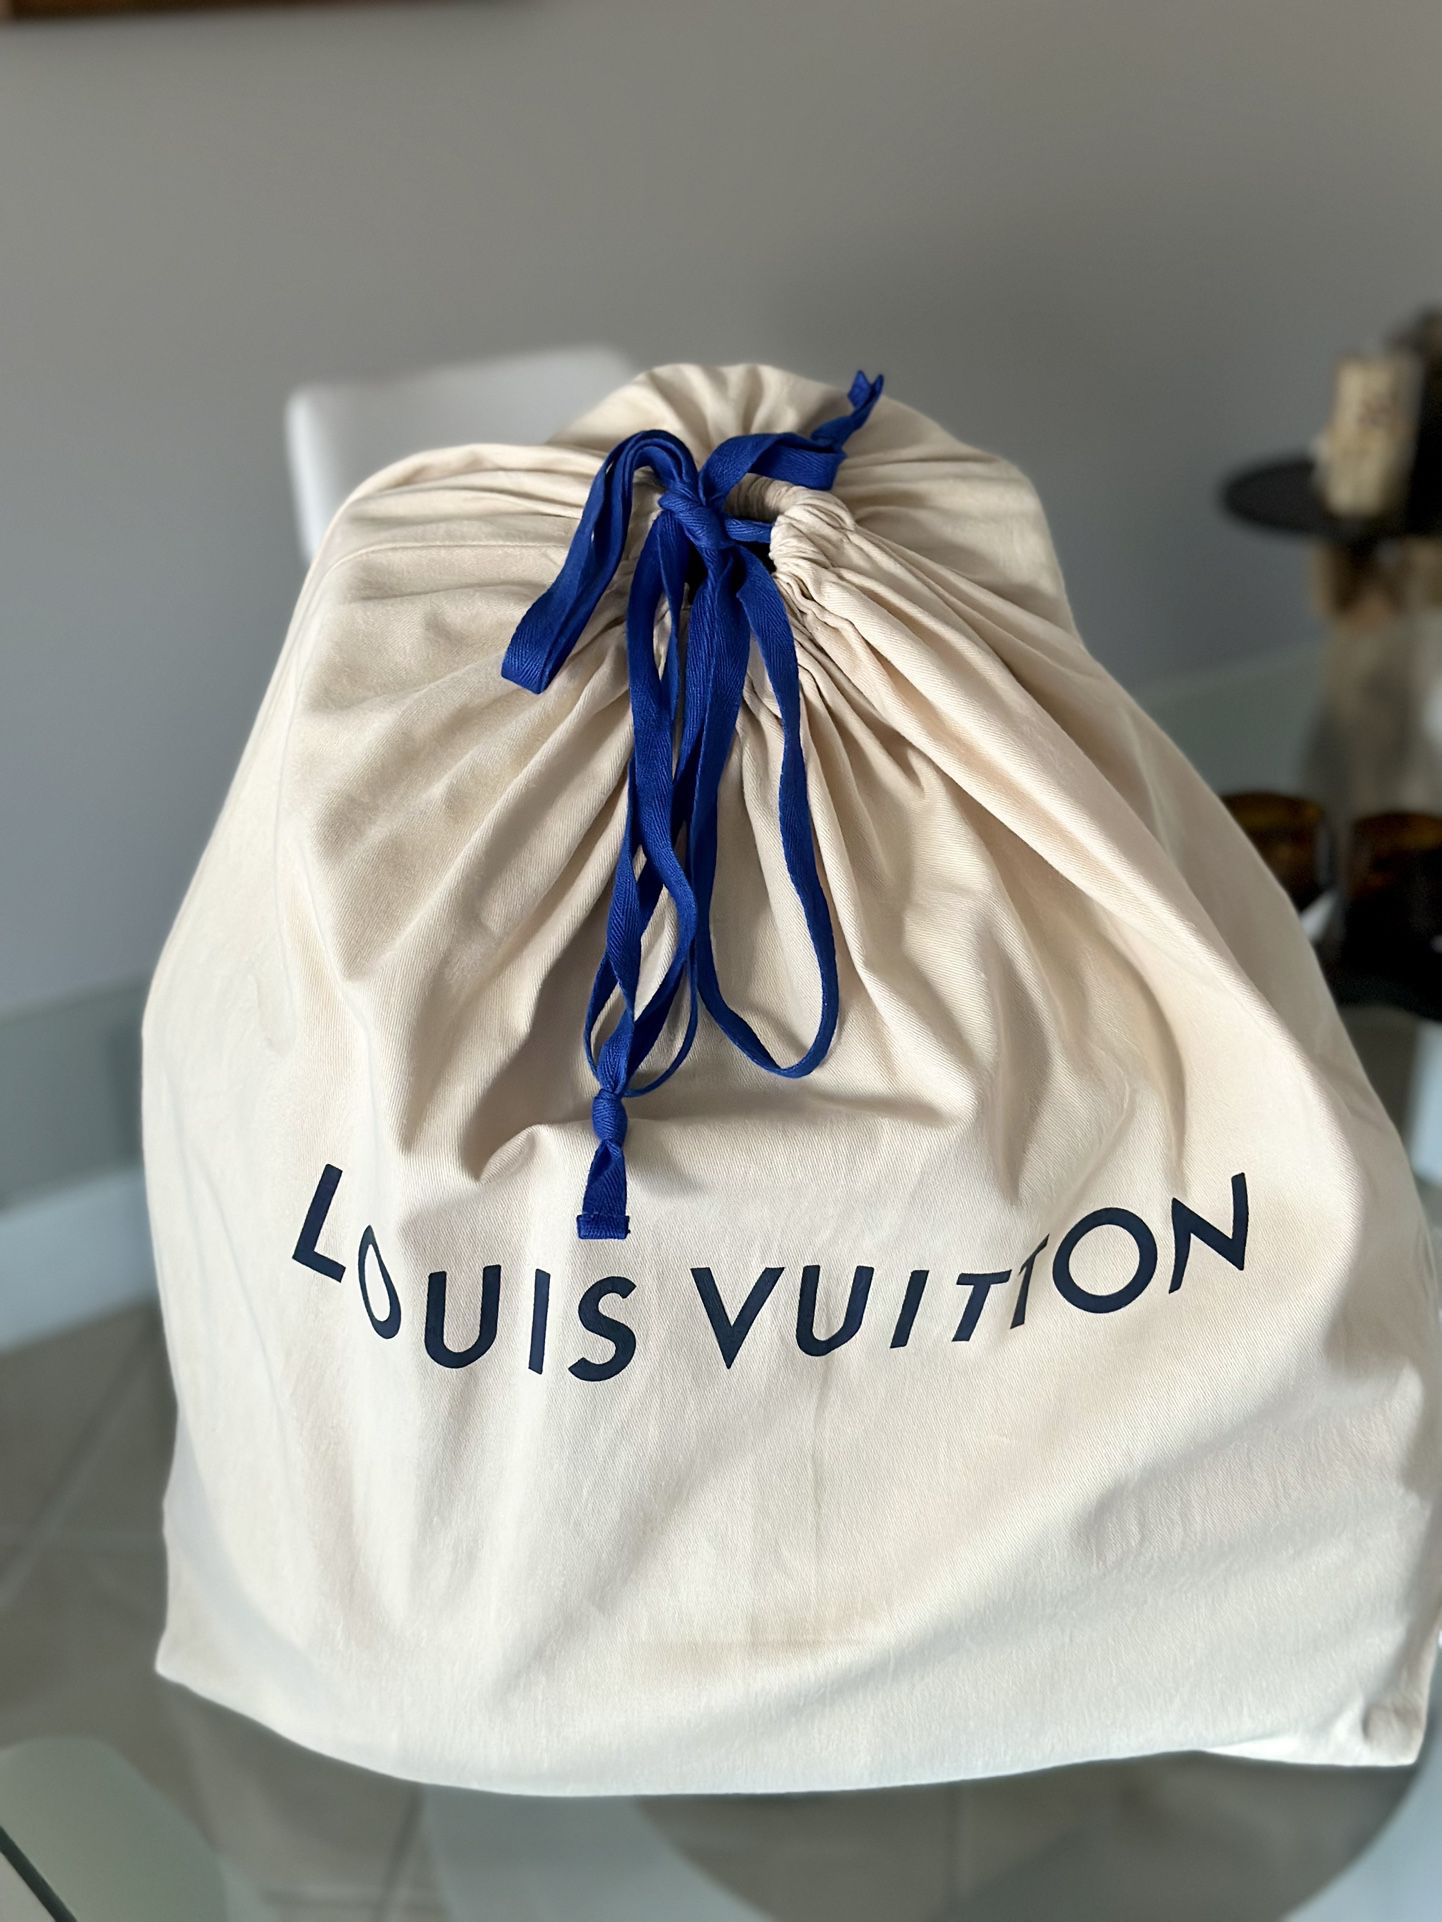 LOUIS VUITTON CHRISTOPHER EPI LEATHER WITH DAMIER GRAPHITE PM BACKPACK for  Sale in Halndle Bch, FL - OfferUp